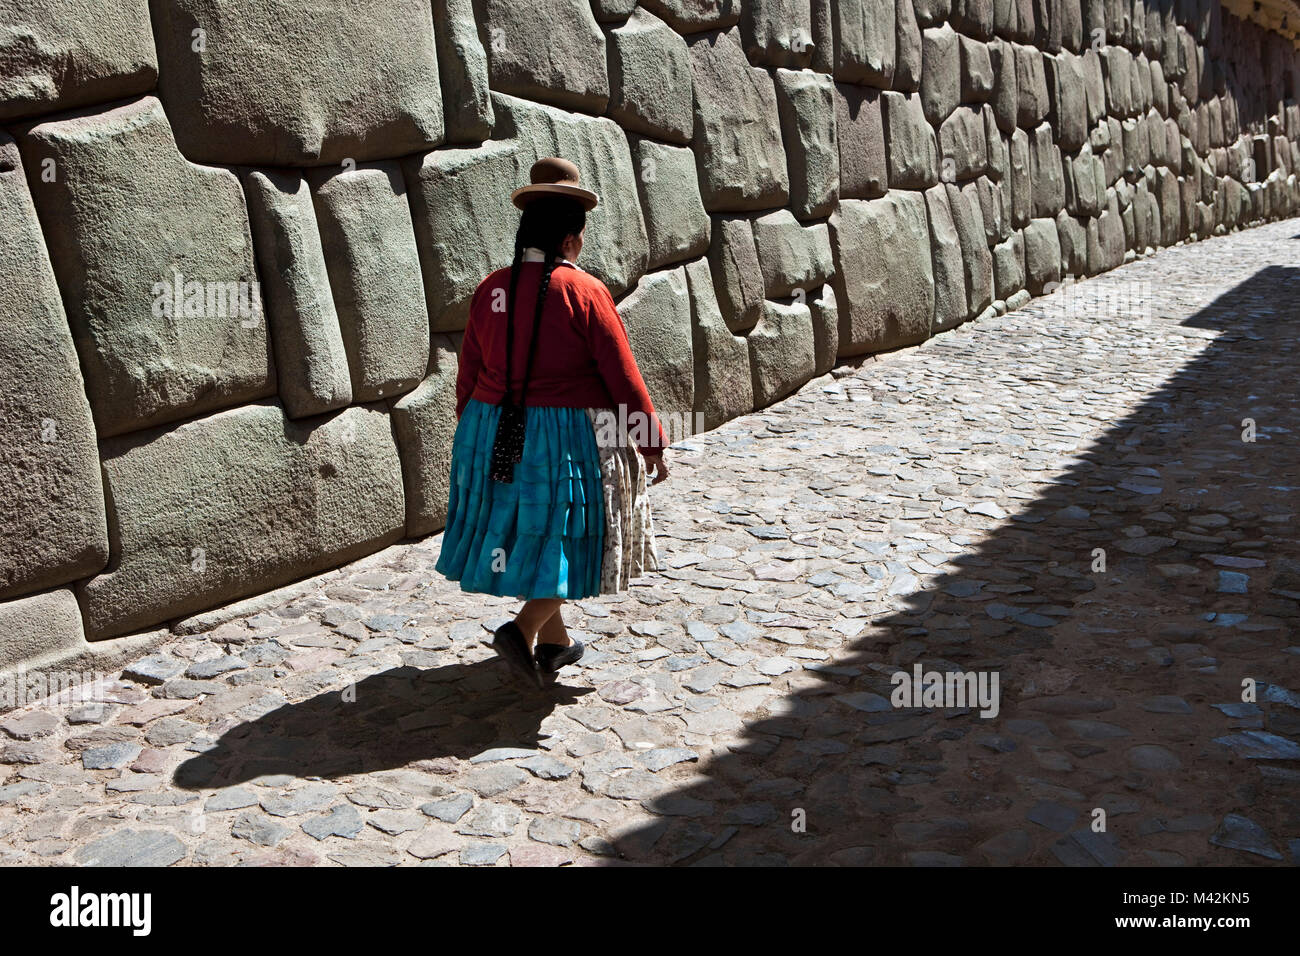 Peru, Cusco, Cuzco, Wall of the Museum of Religious Art. Examples of polygonal masonry. Indian woman.  Unesco World Heritage Site. Stock Photo